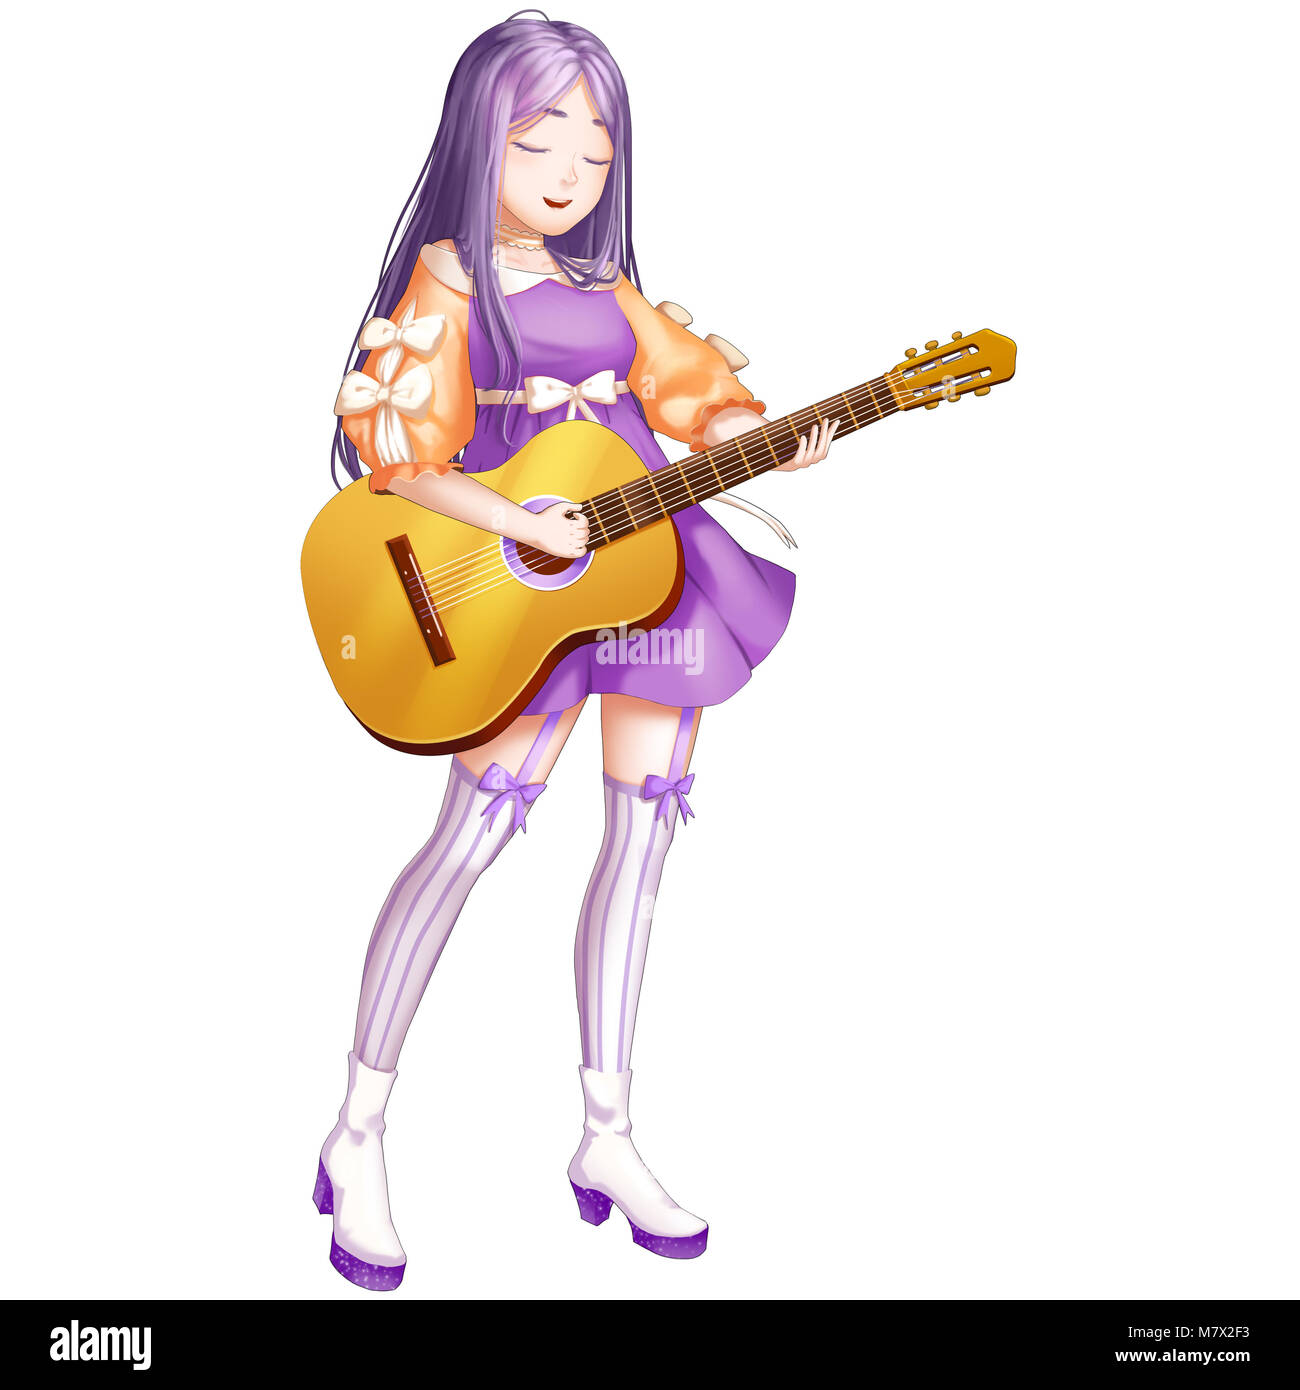 Guitar Music Girl With Anime And Cartoon Style She Is A Super Star Video Game S Digital Cg Artwork Concept Illustration Realistic Cartoon Style Stock Photo Alamy